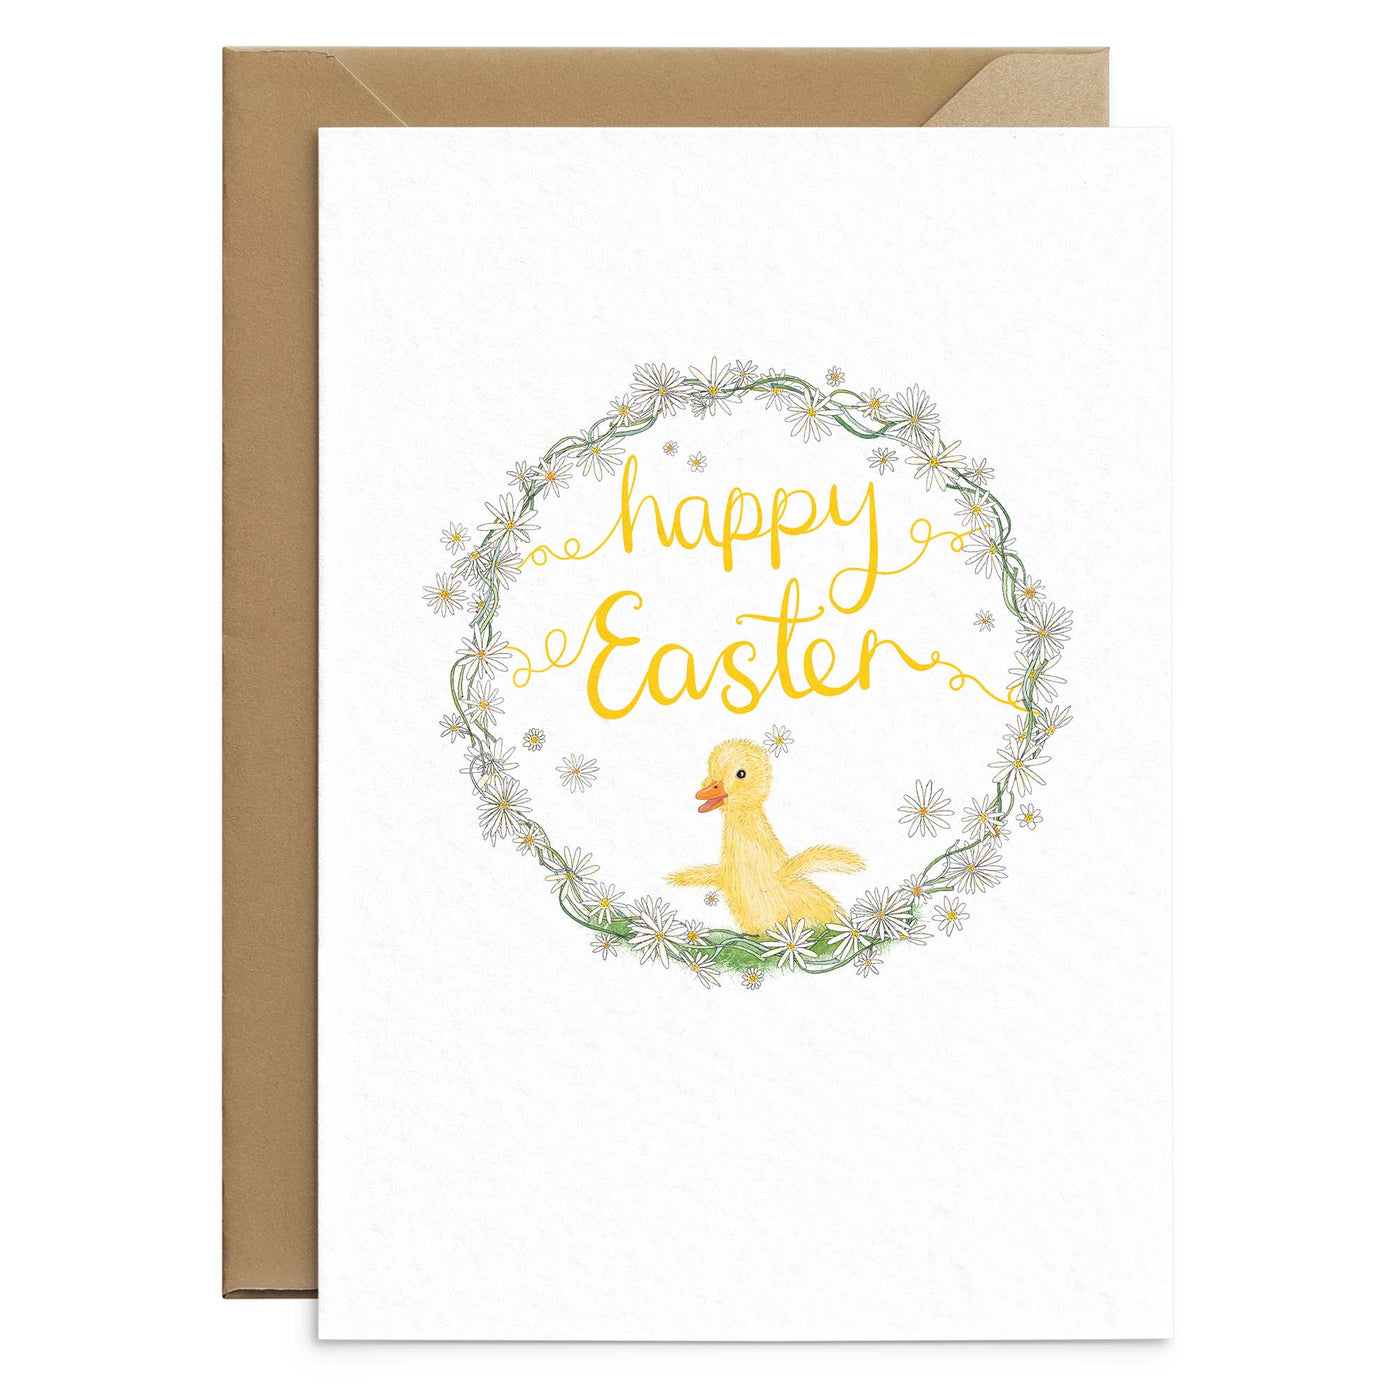 A cute easter greetings card featuring a yellow duckling drawn inside a wreath of daisies and completed by hand scripted yellow text that reads 'happy easter'. On a brown recycled envelopes. Greetings cards by Poppins and co.